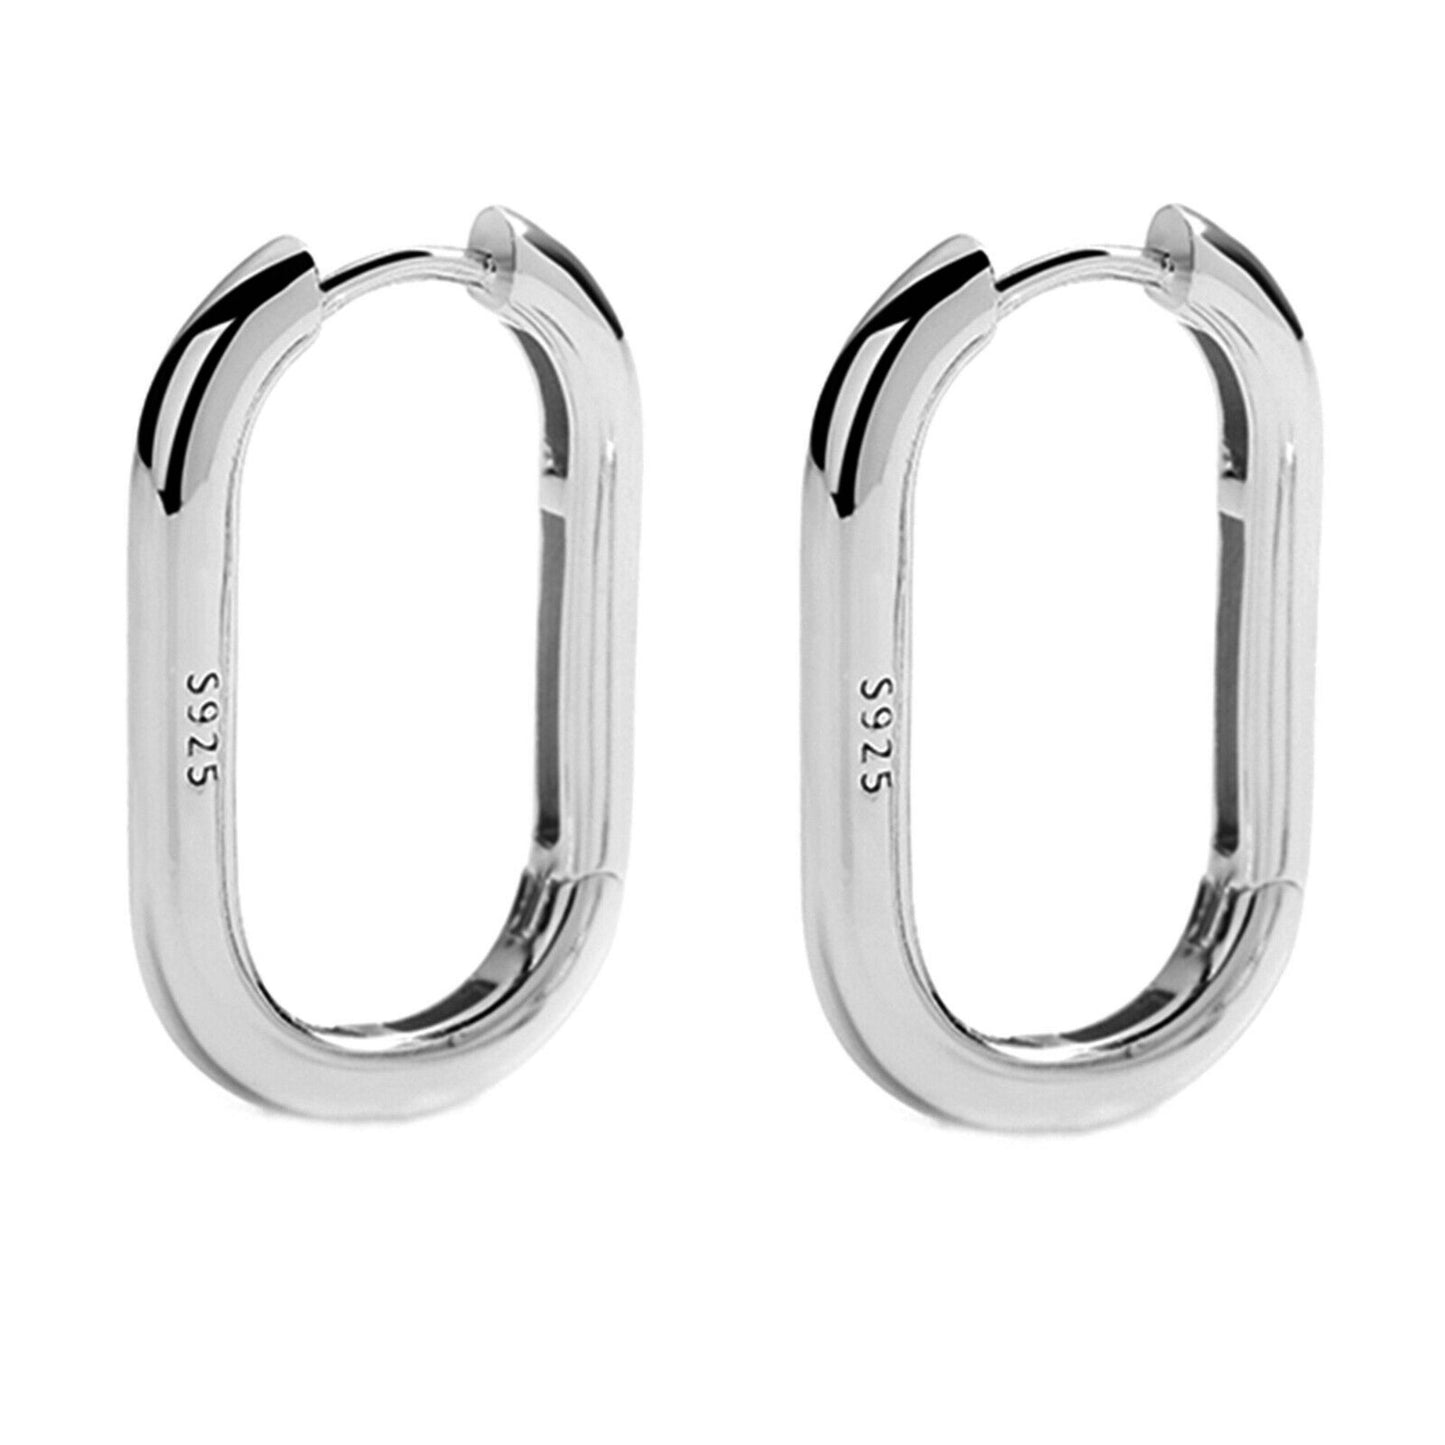 Rhodium-plated Sterling Silver Oval Hoop Earrings with Square Opening